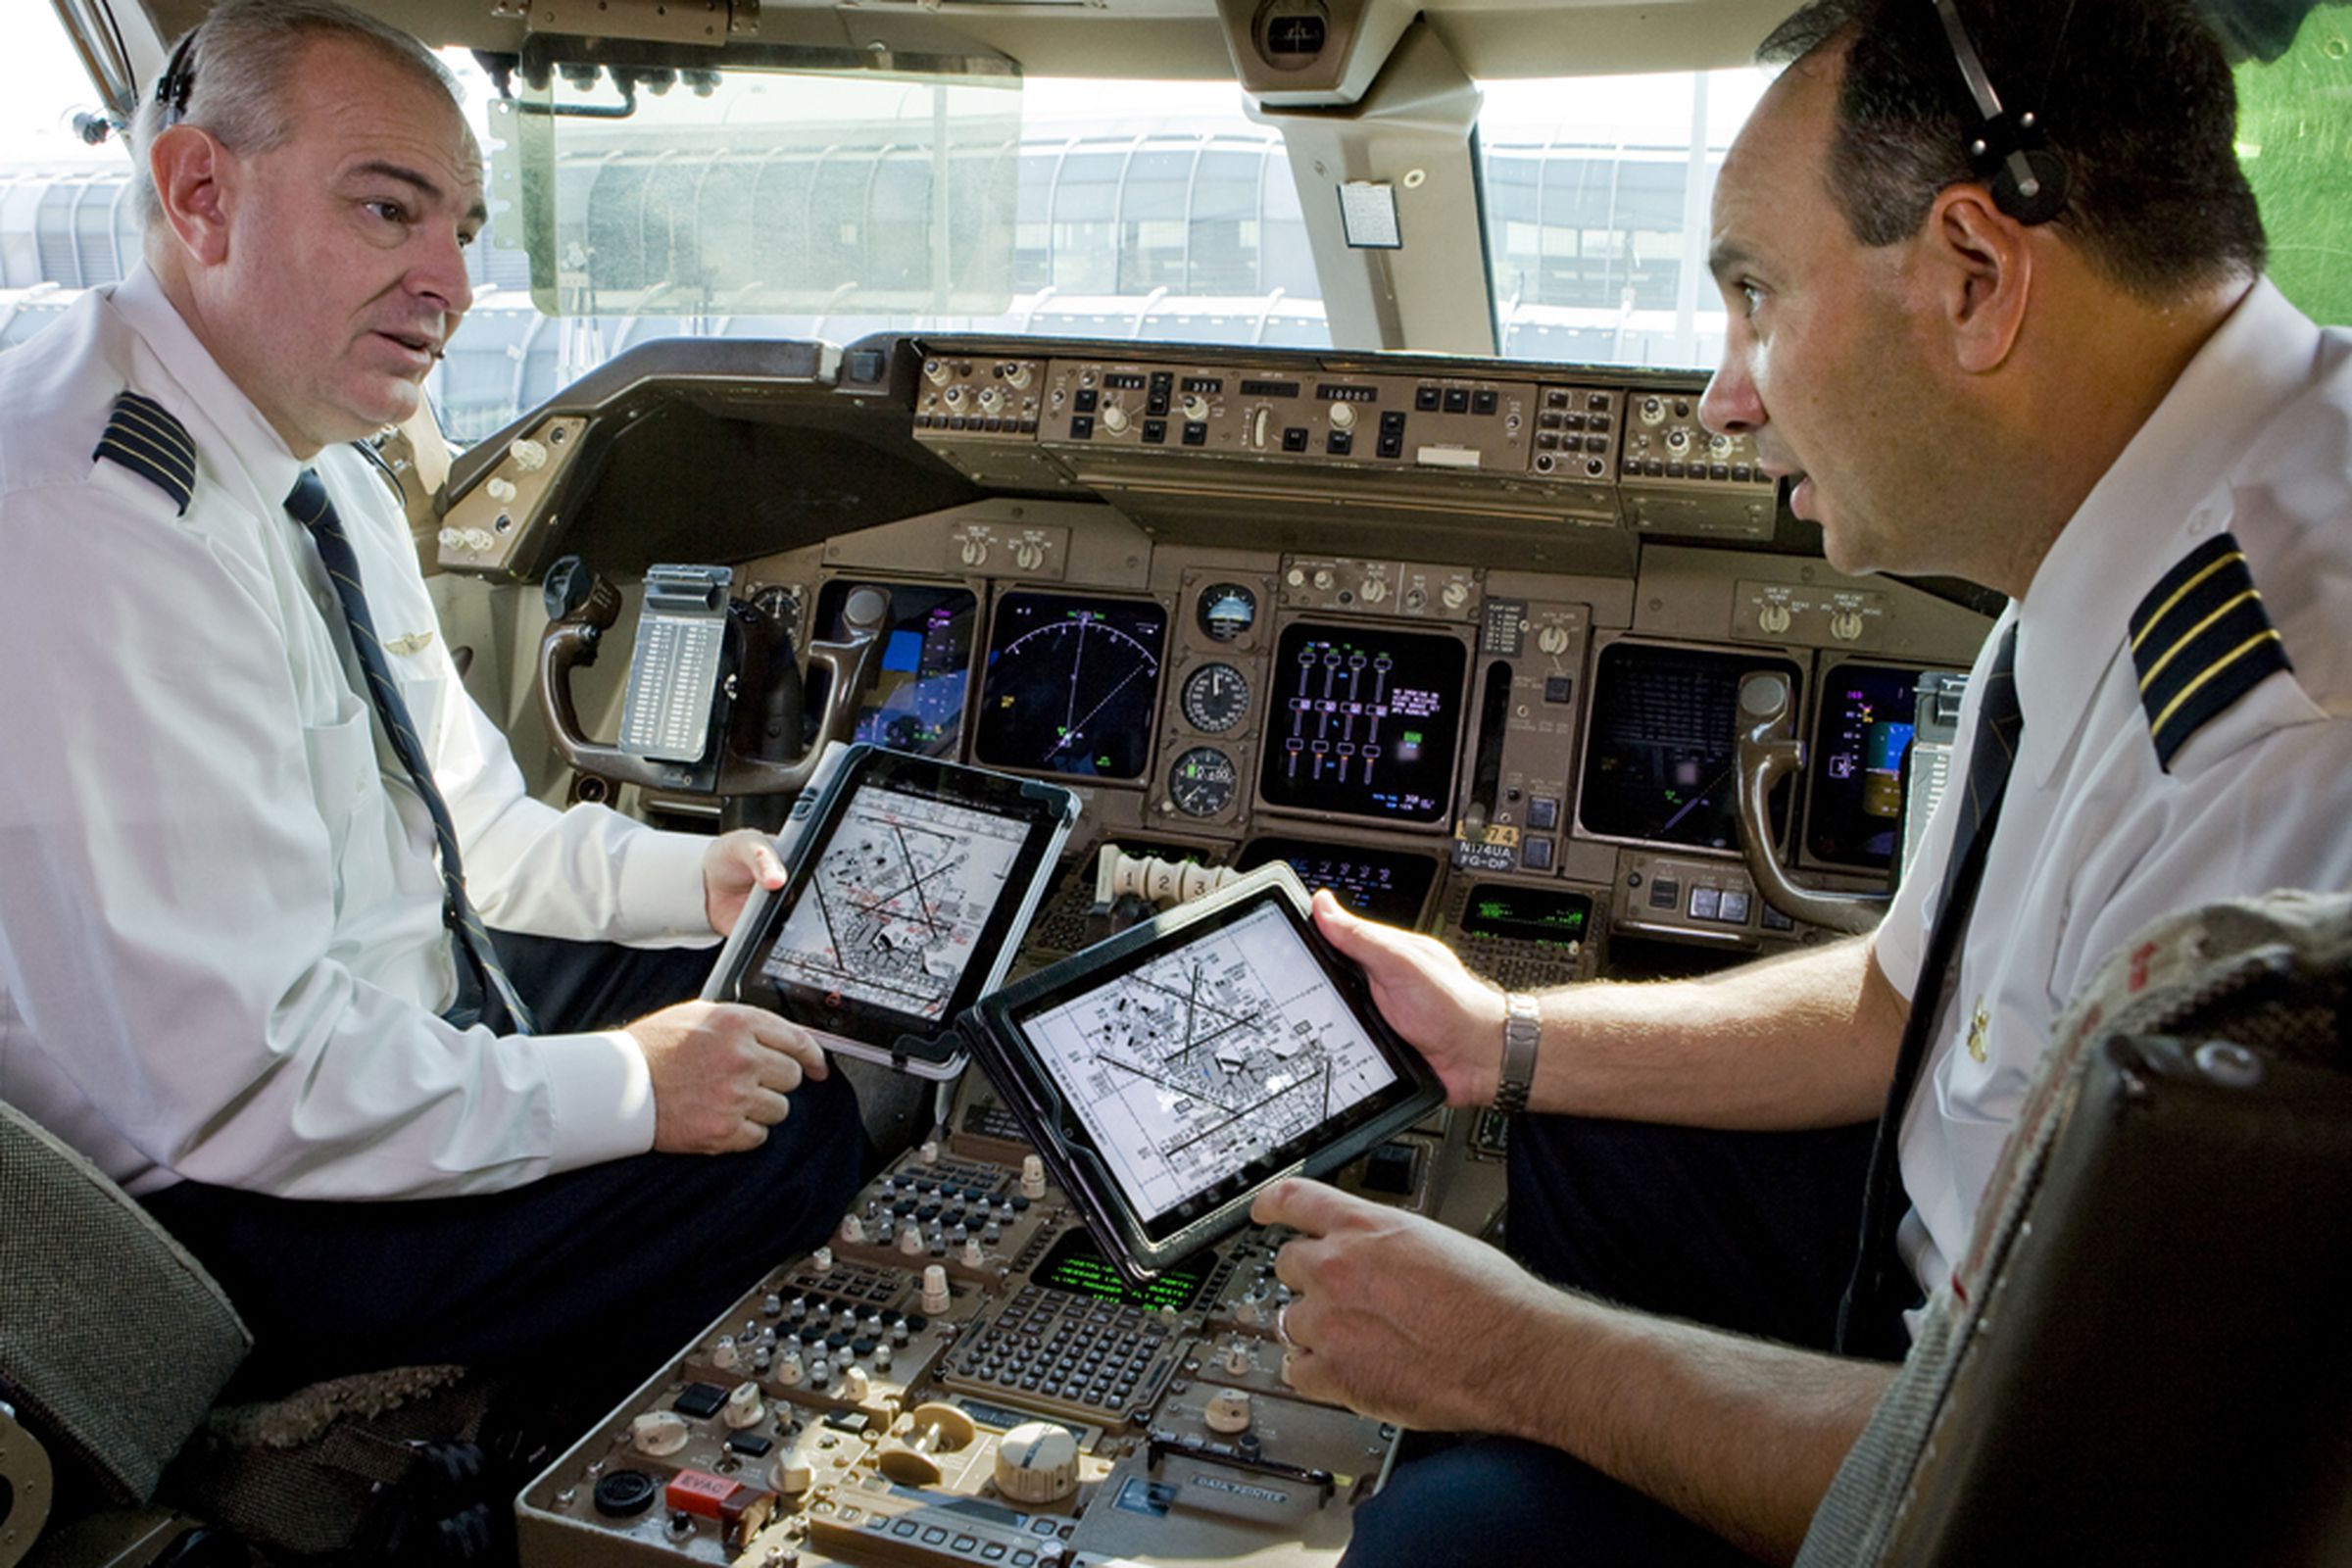 United pilots with iPads